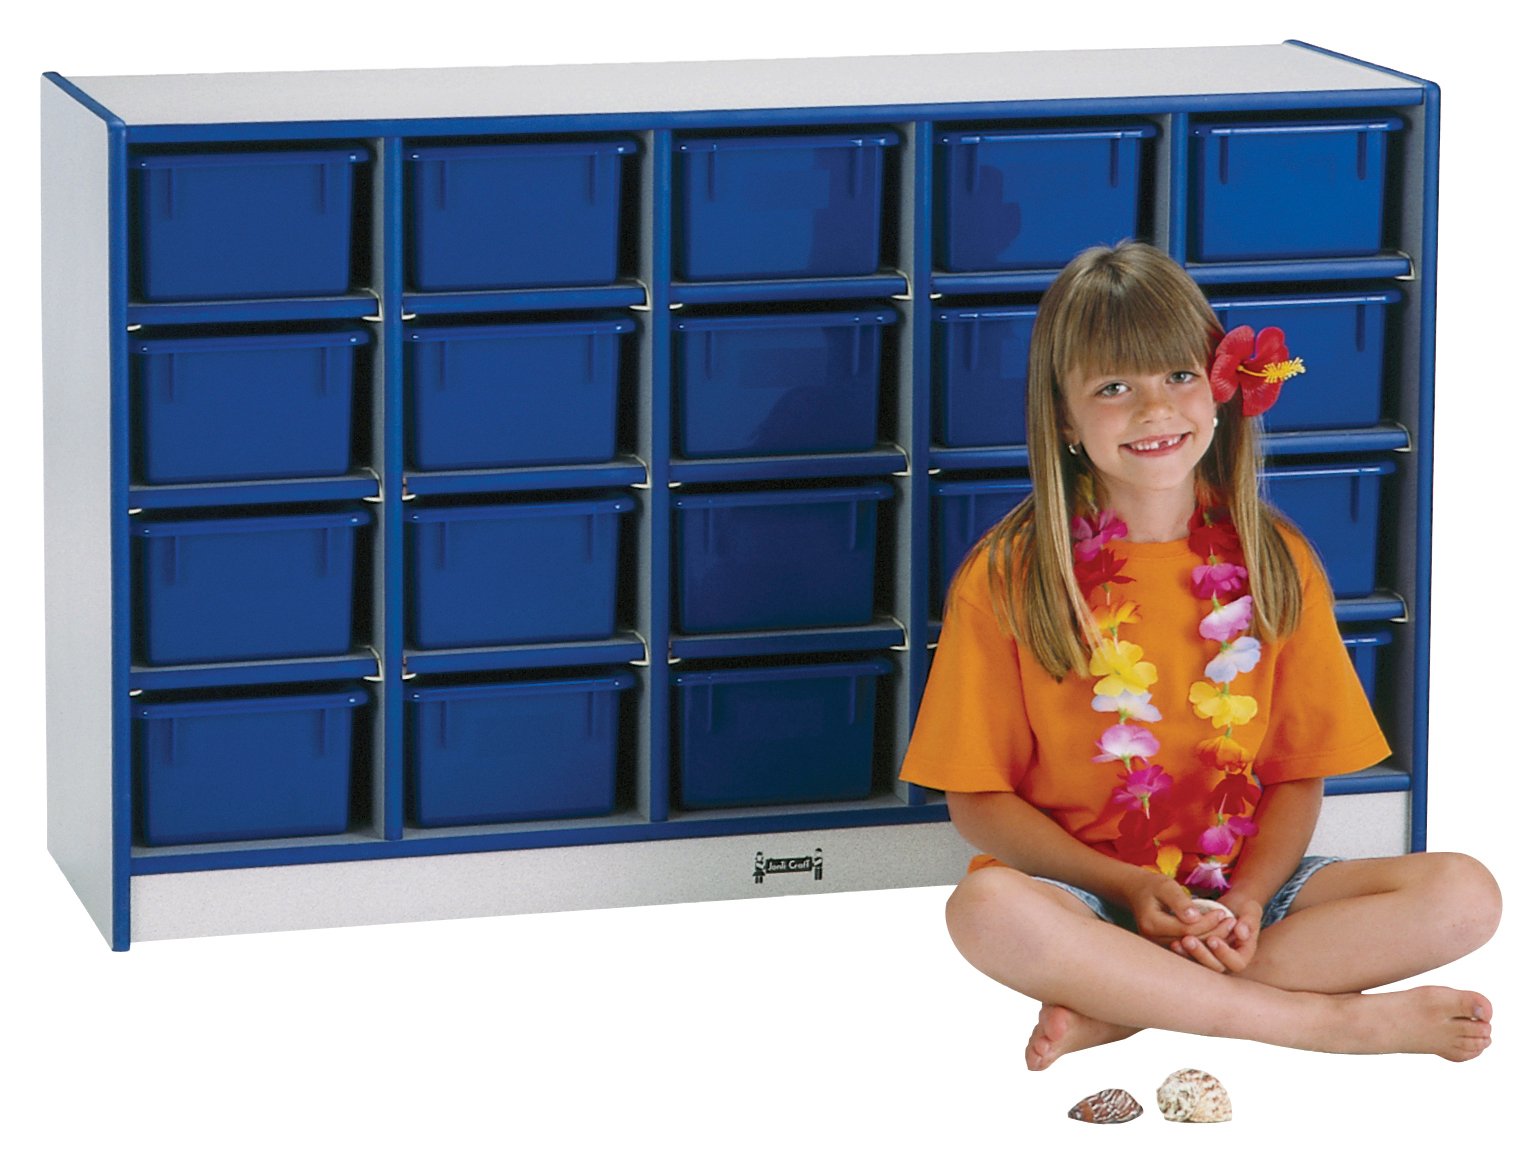 Rainbow AccentsÂ® 20 Cubbie-Tray Mobile Storage - without Trays - Navy